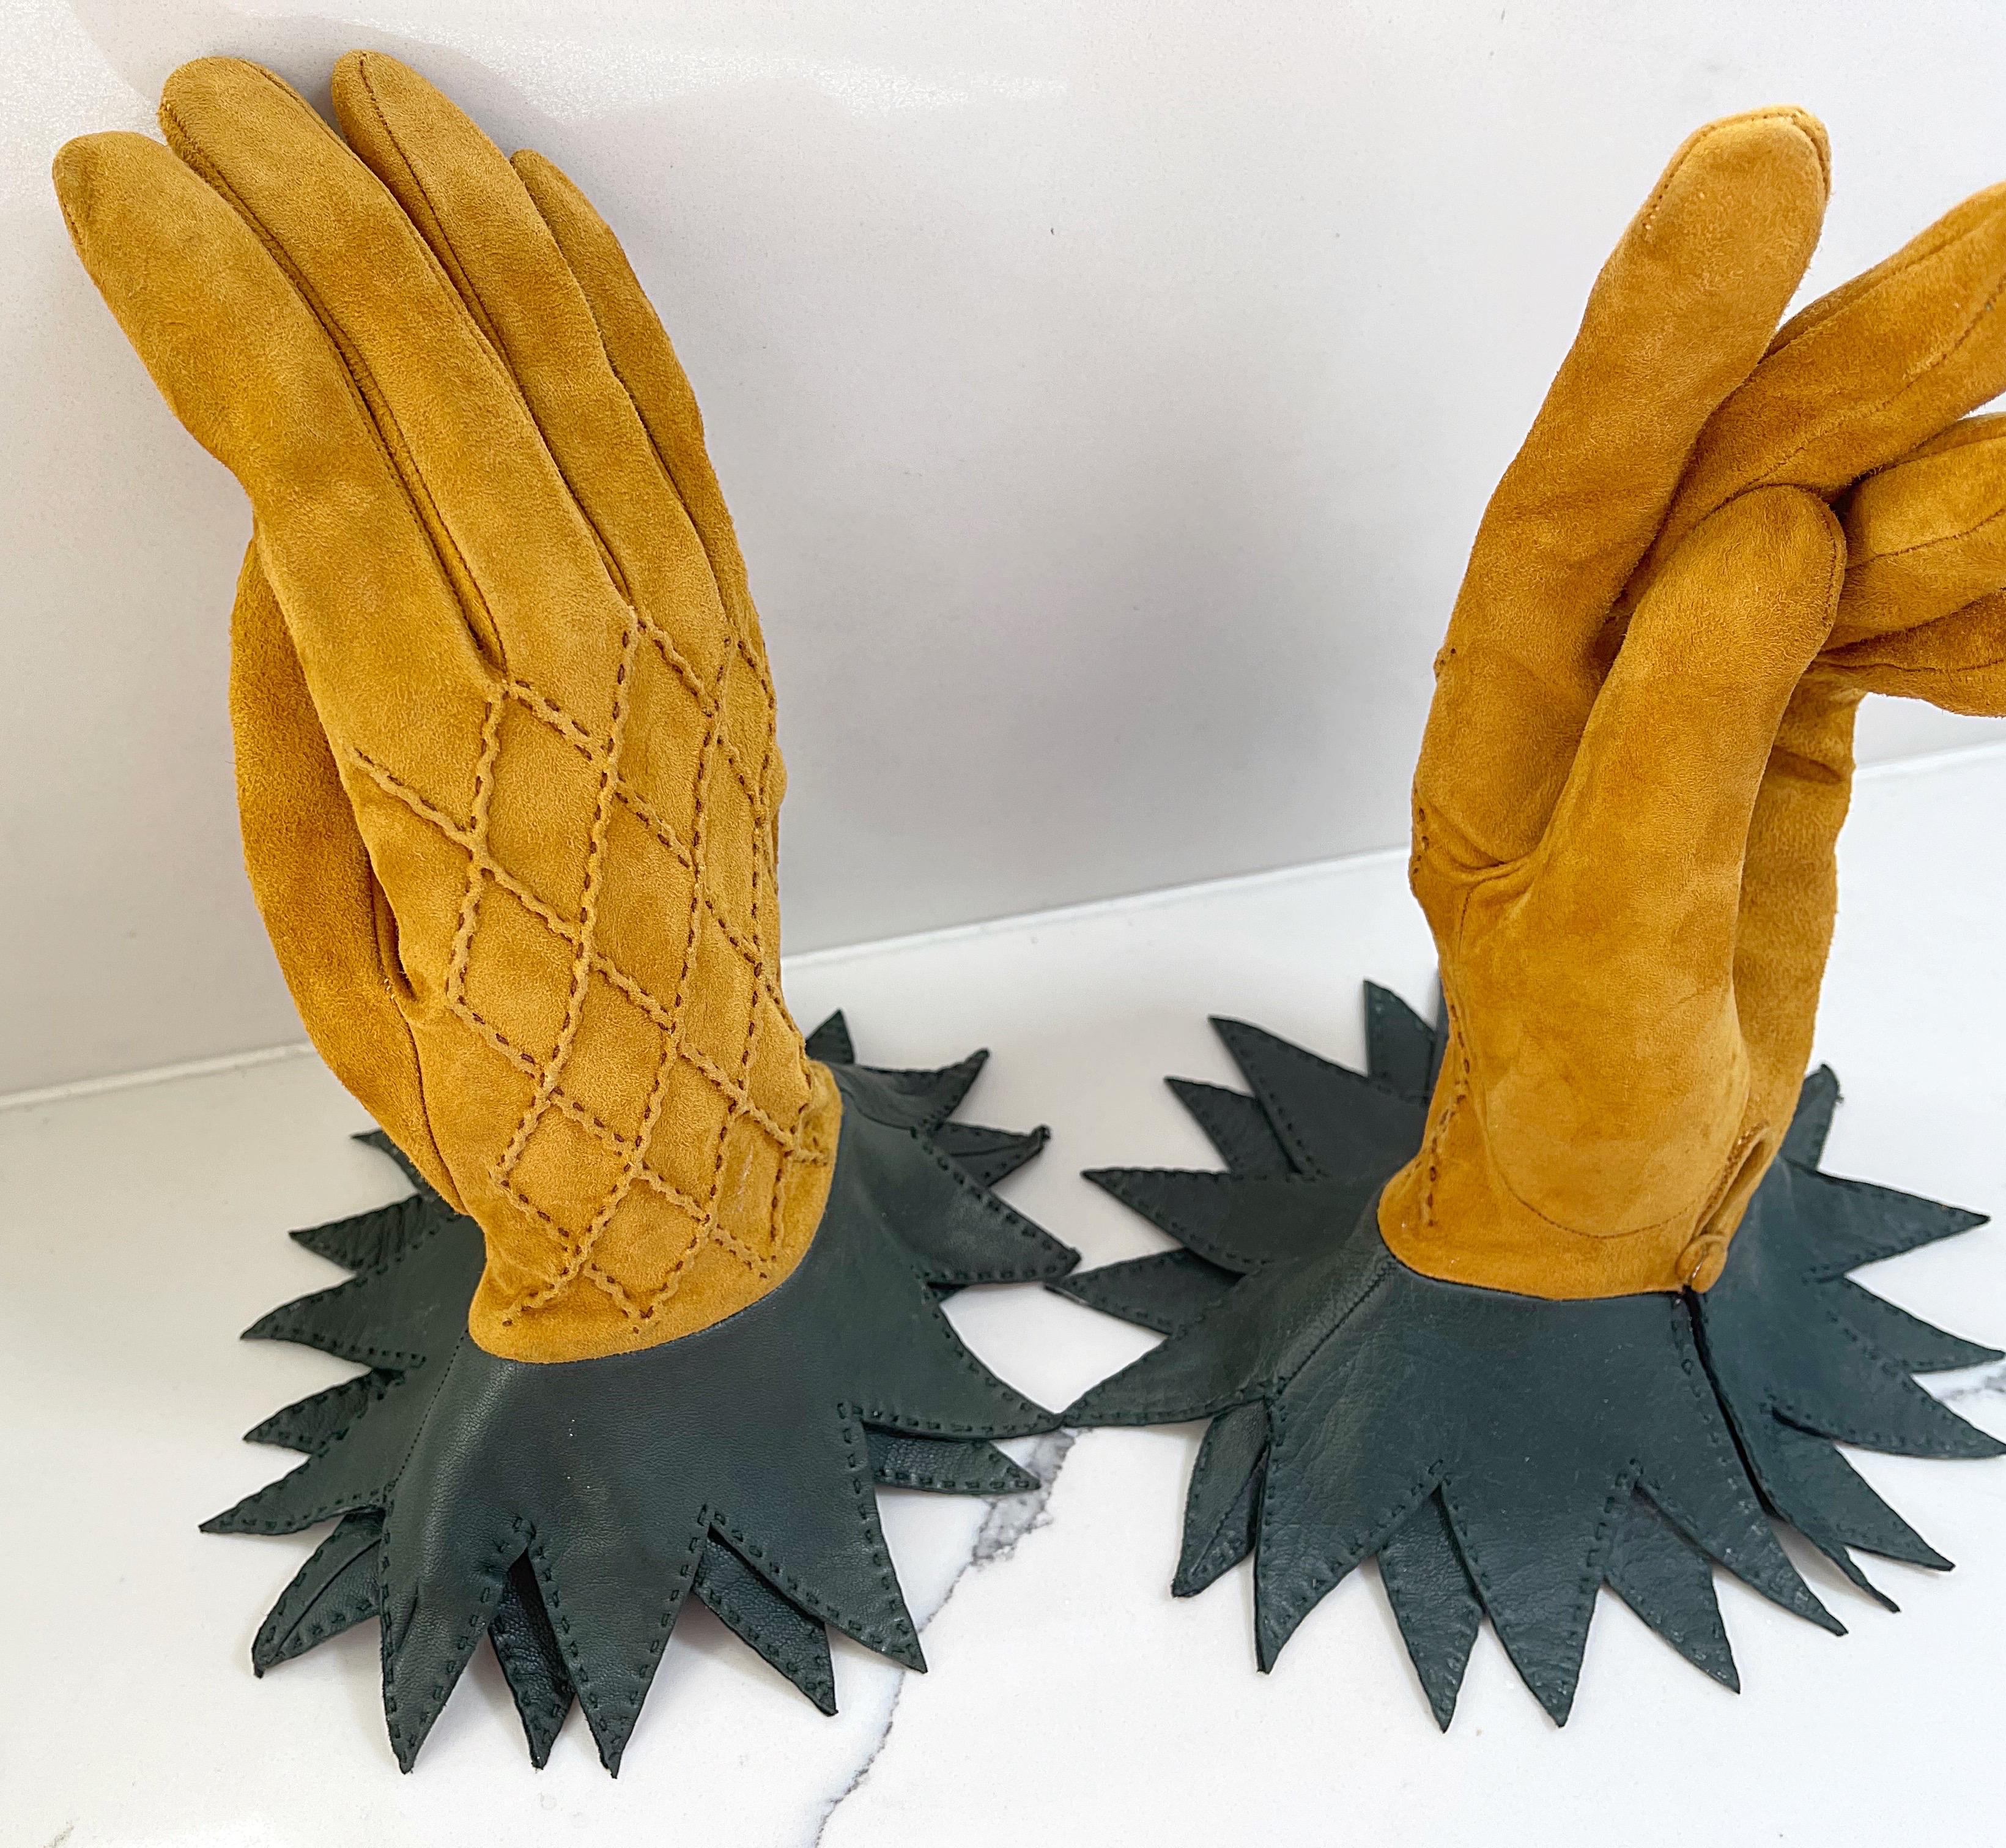 Ultra rare and collectible 1990s HERMÈS gloves ! Made to look like pineapples, these beauties feature a golden hue diamond quilted suede with buttery soft green leather. Buttons at each interior hand. 
In great condition, and comes with the original